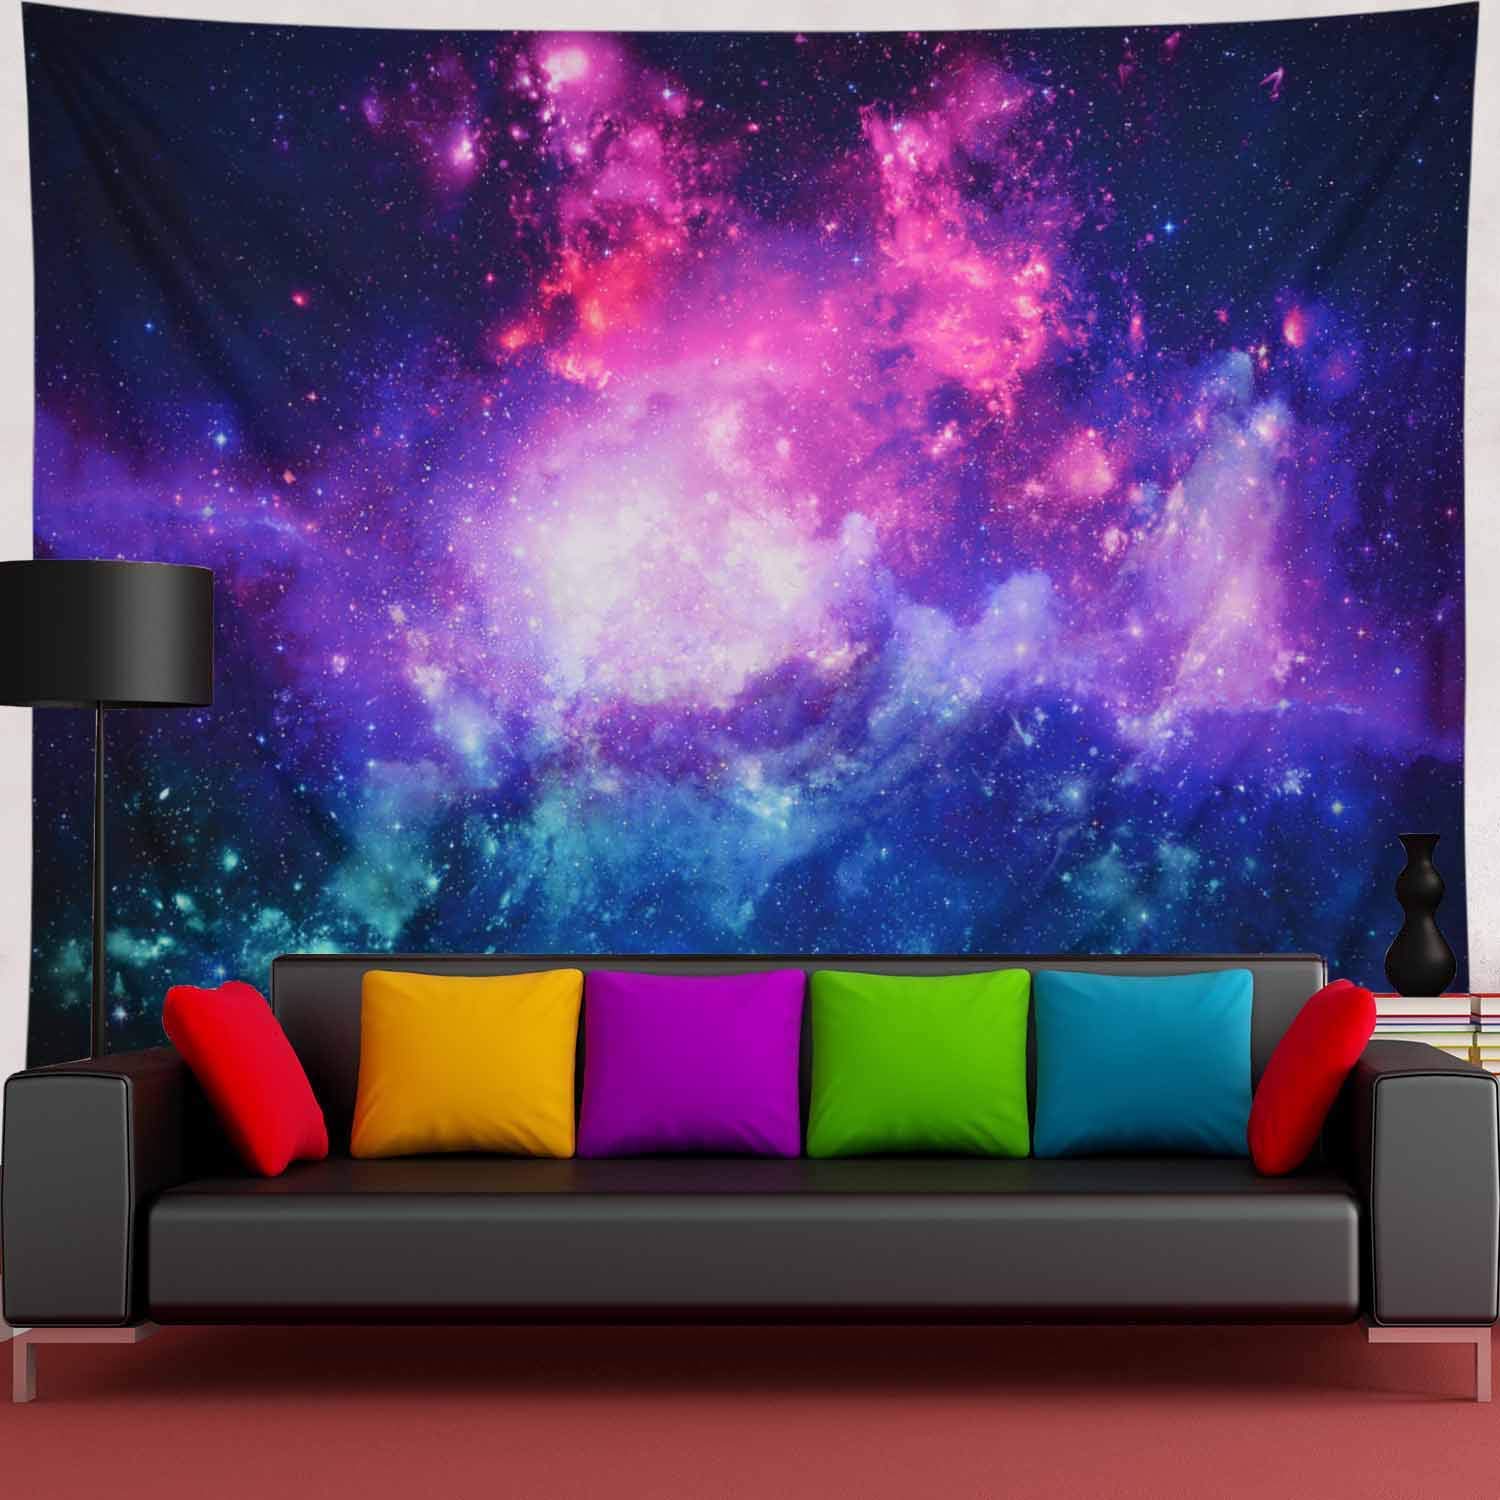 Book Cover Amtoodopin Galaxy Tapestry Purple Starry Night Tapestry 3D Cosmic Space Tapestry Psychedelic Tapestry Mystic Stars Tapestry Wall Hanging Boho Hippie Tapestry for Ceiling Living Room Dorm Decor W78